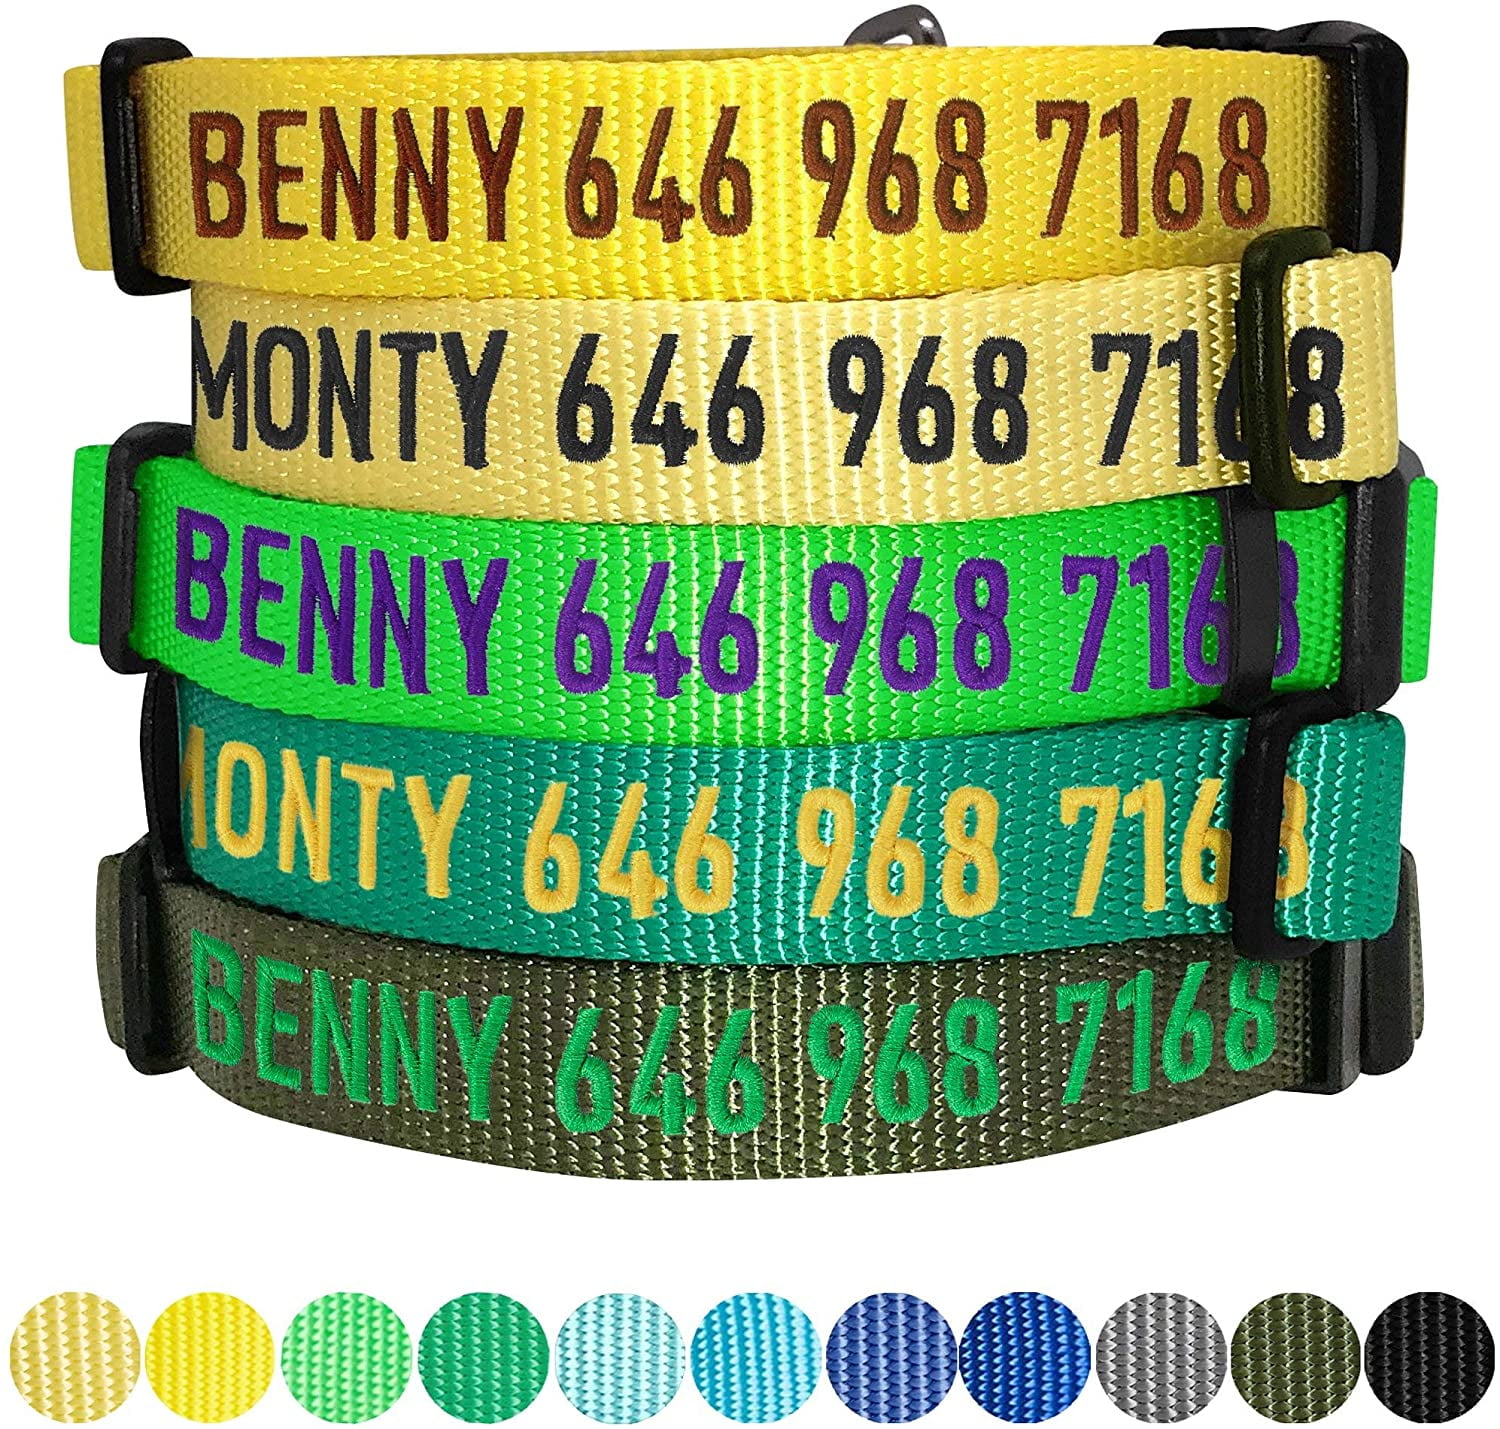 Blueberry Pet Essentials 20 Personalized Dog Collars Colors Classic Nylon Adjustable Dog Collars for Puppy Small Medium Large Dogs